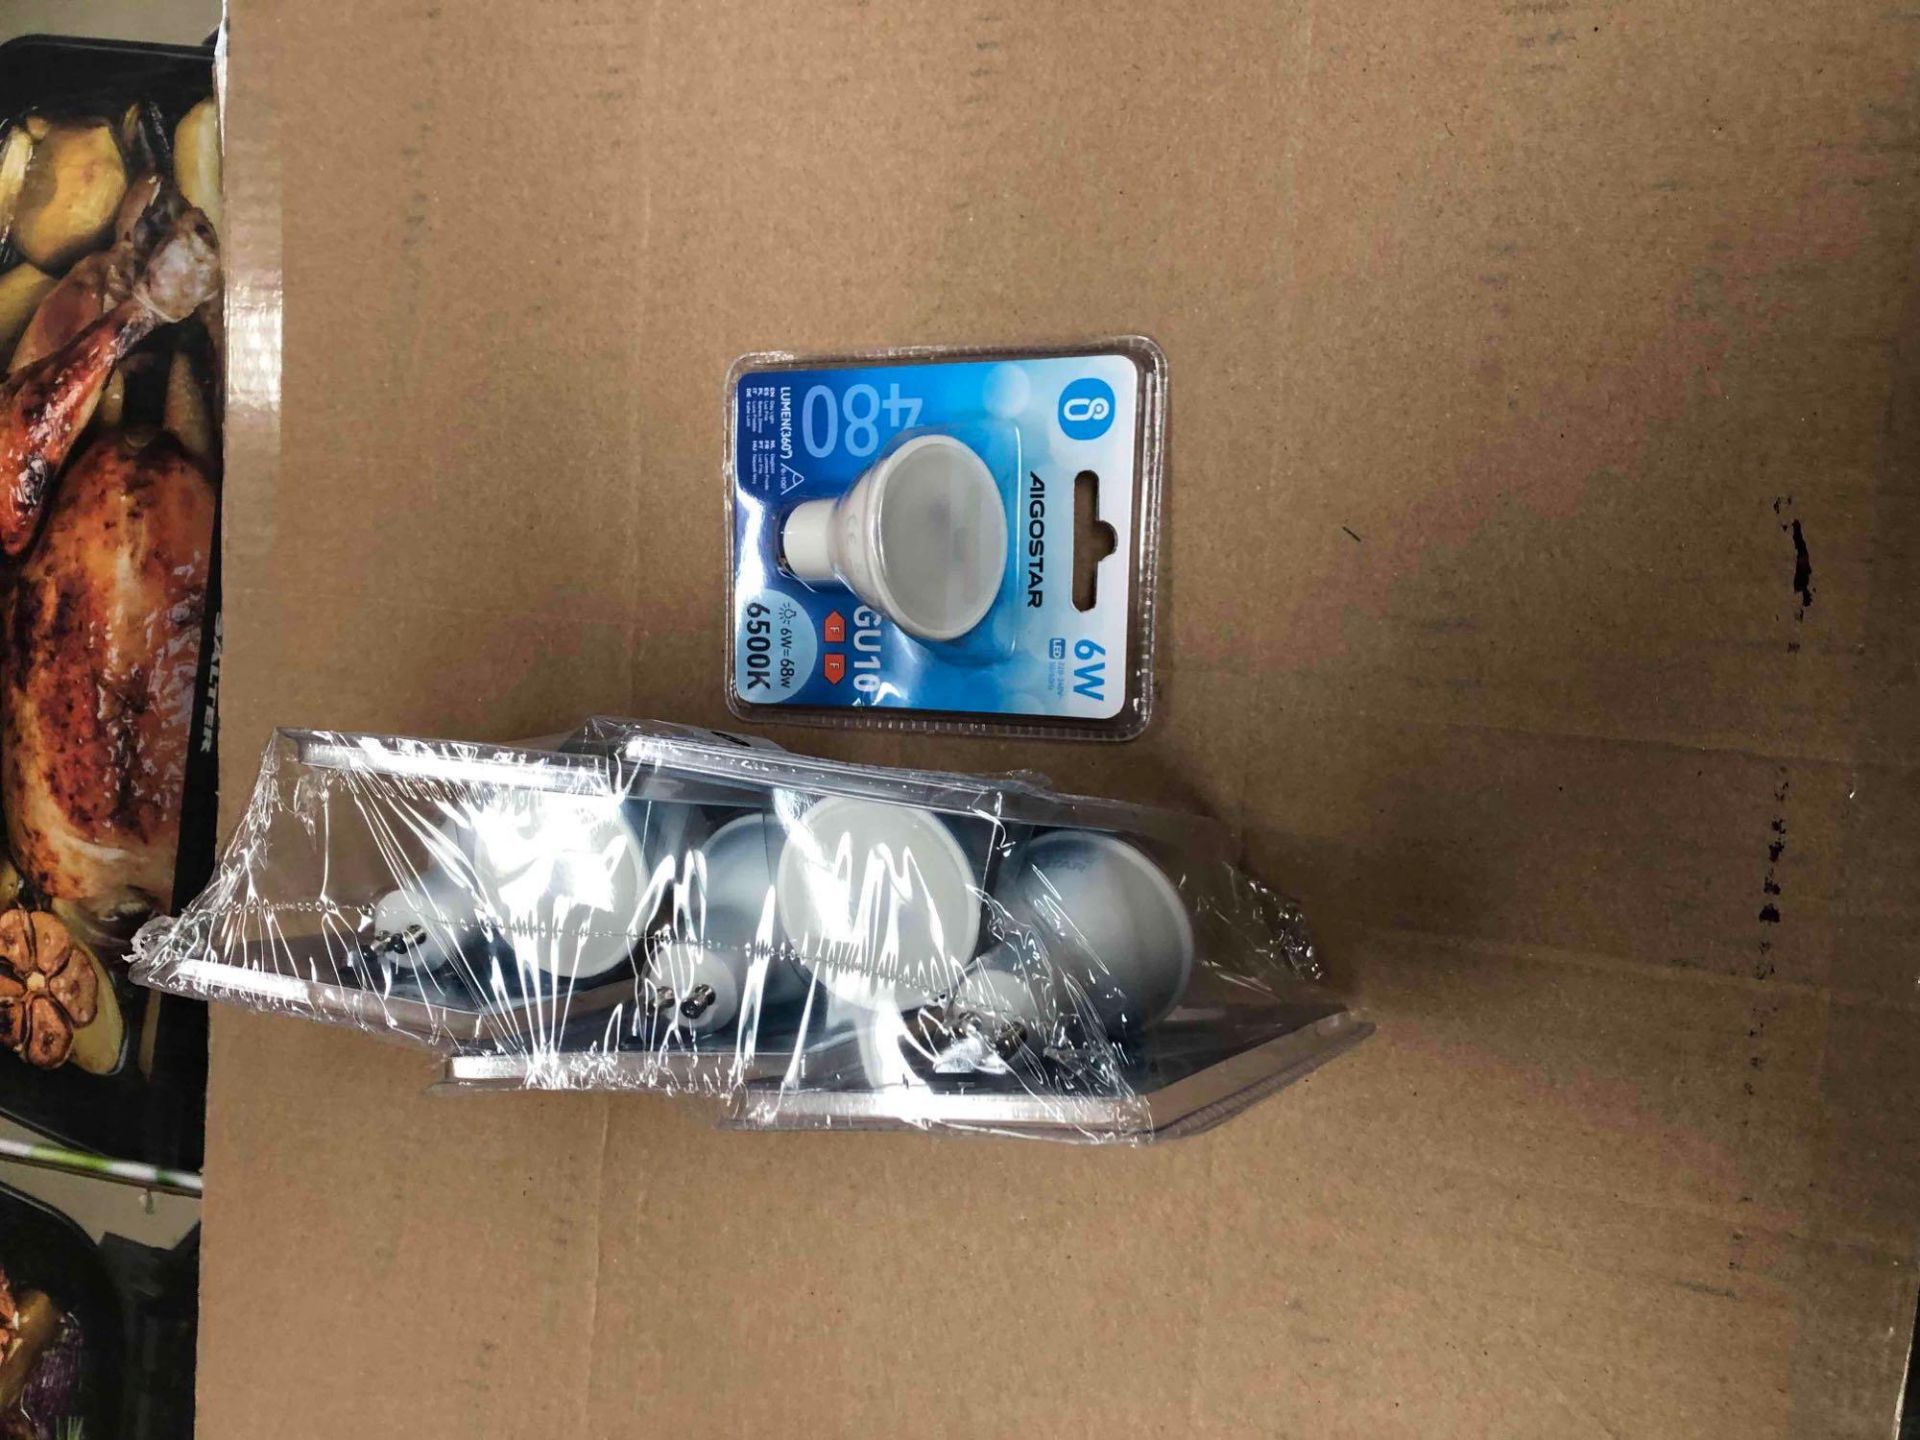 Brand new boxed GU10 LED light bulbs RRP £7.99 each Approx 30 in a box, value £240